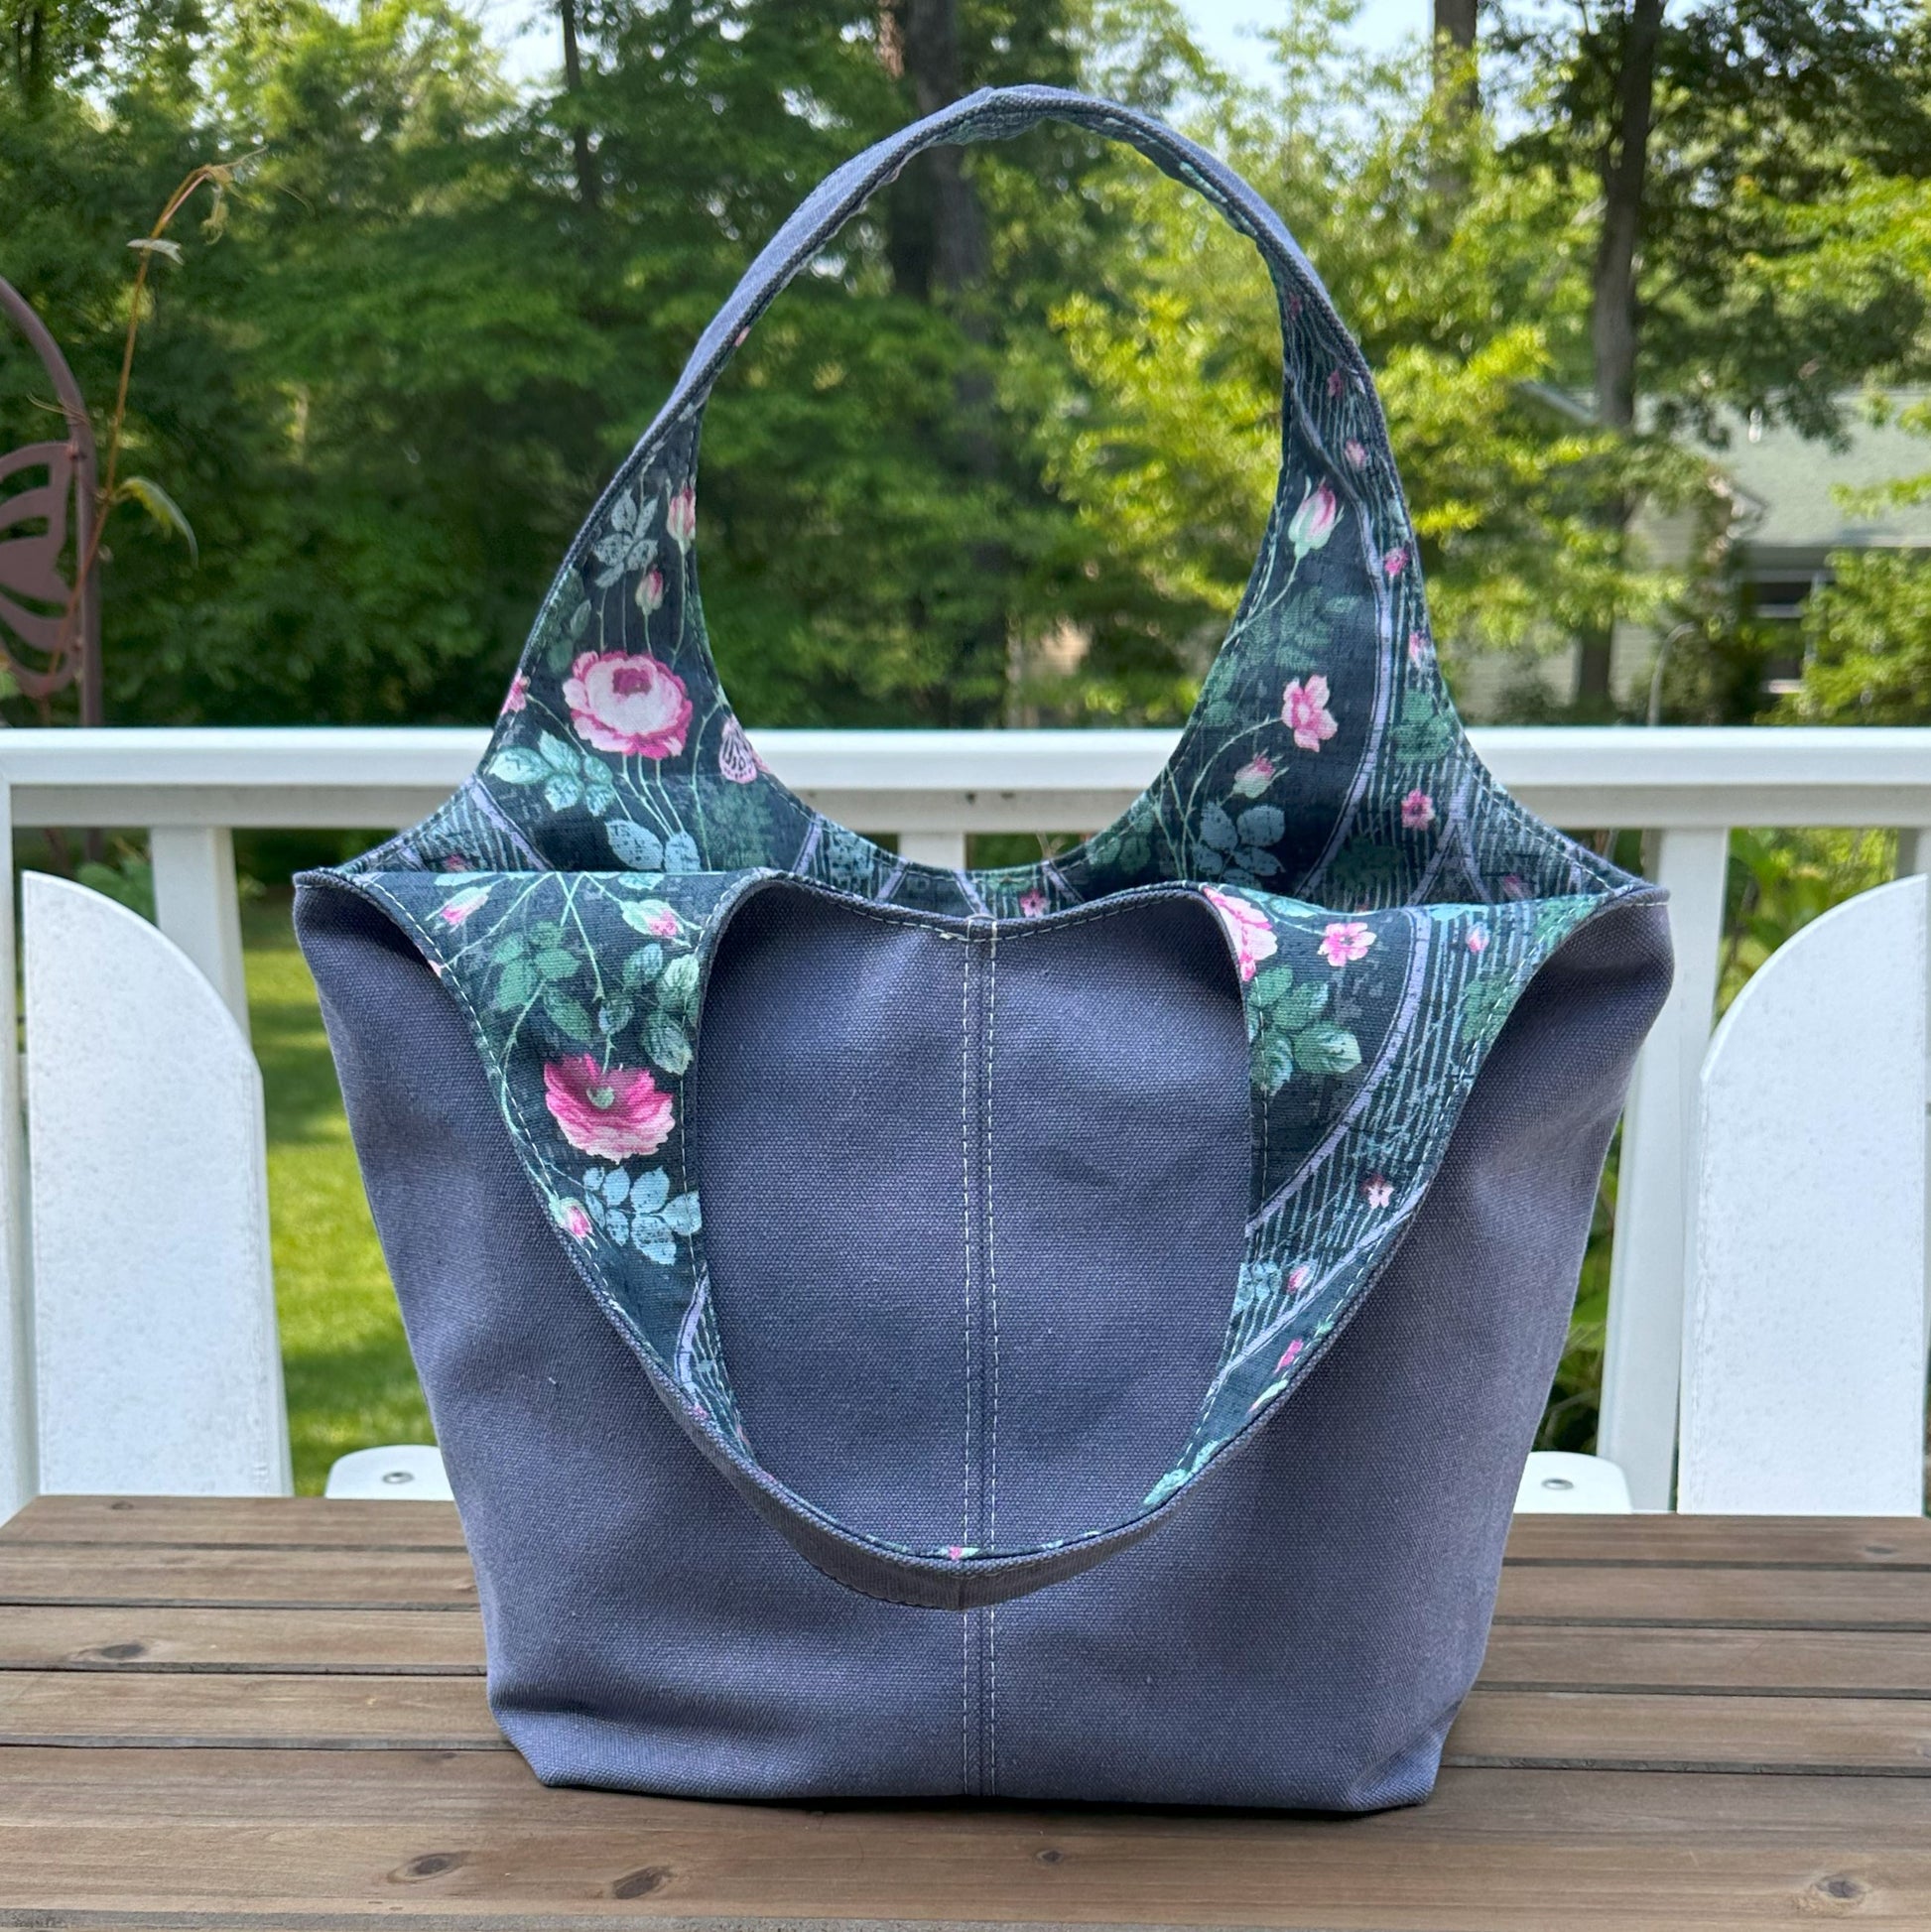 Harbor Blue Stone Washed Canvas and Victoria Flowers Canvas interior with Nickel Rivets Cambridge Shoulder Bag squirescanvascreations.com 